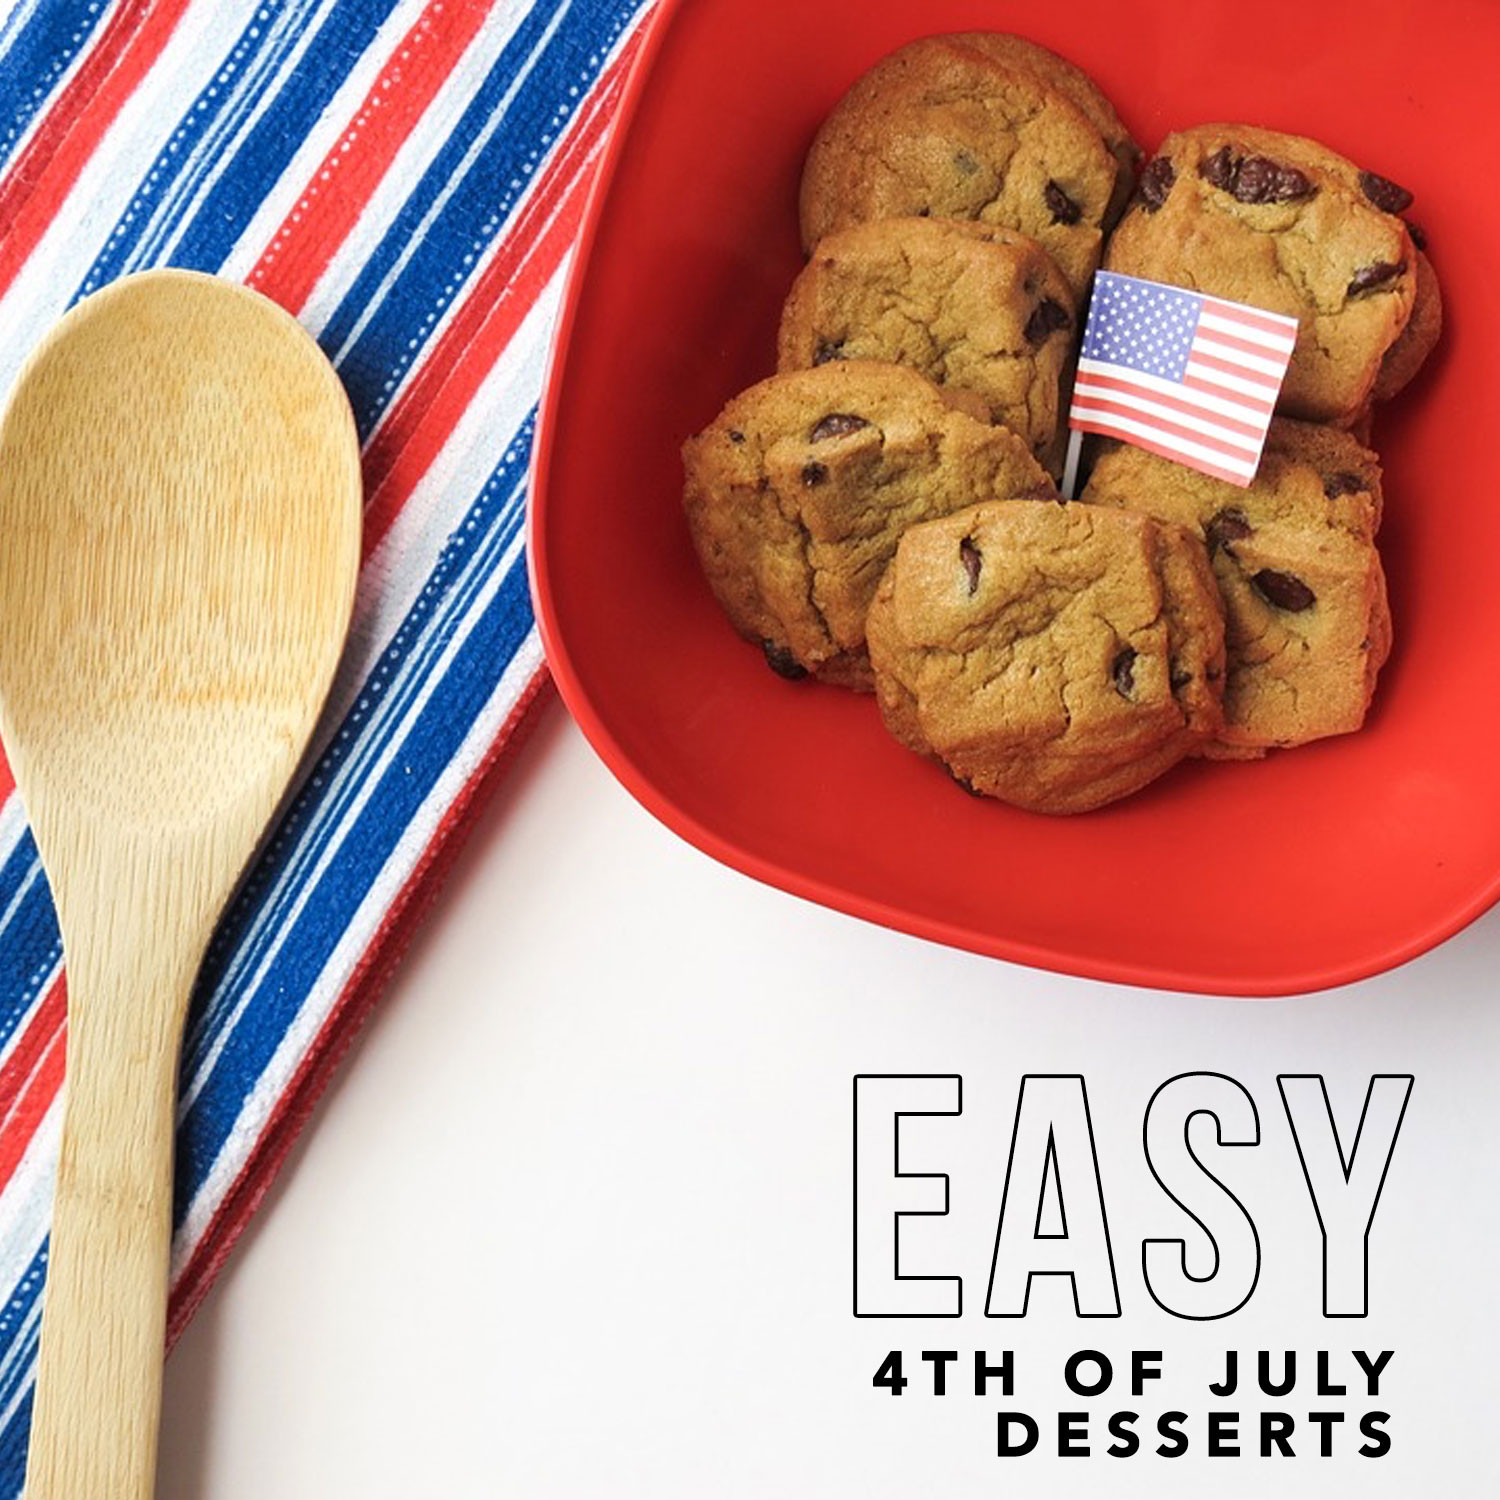 Simple 4Th Of July Desserts
 Easy 4th of July Desserts